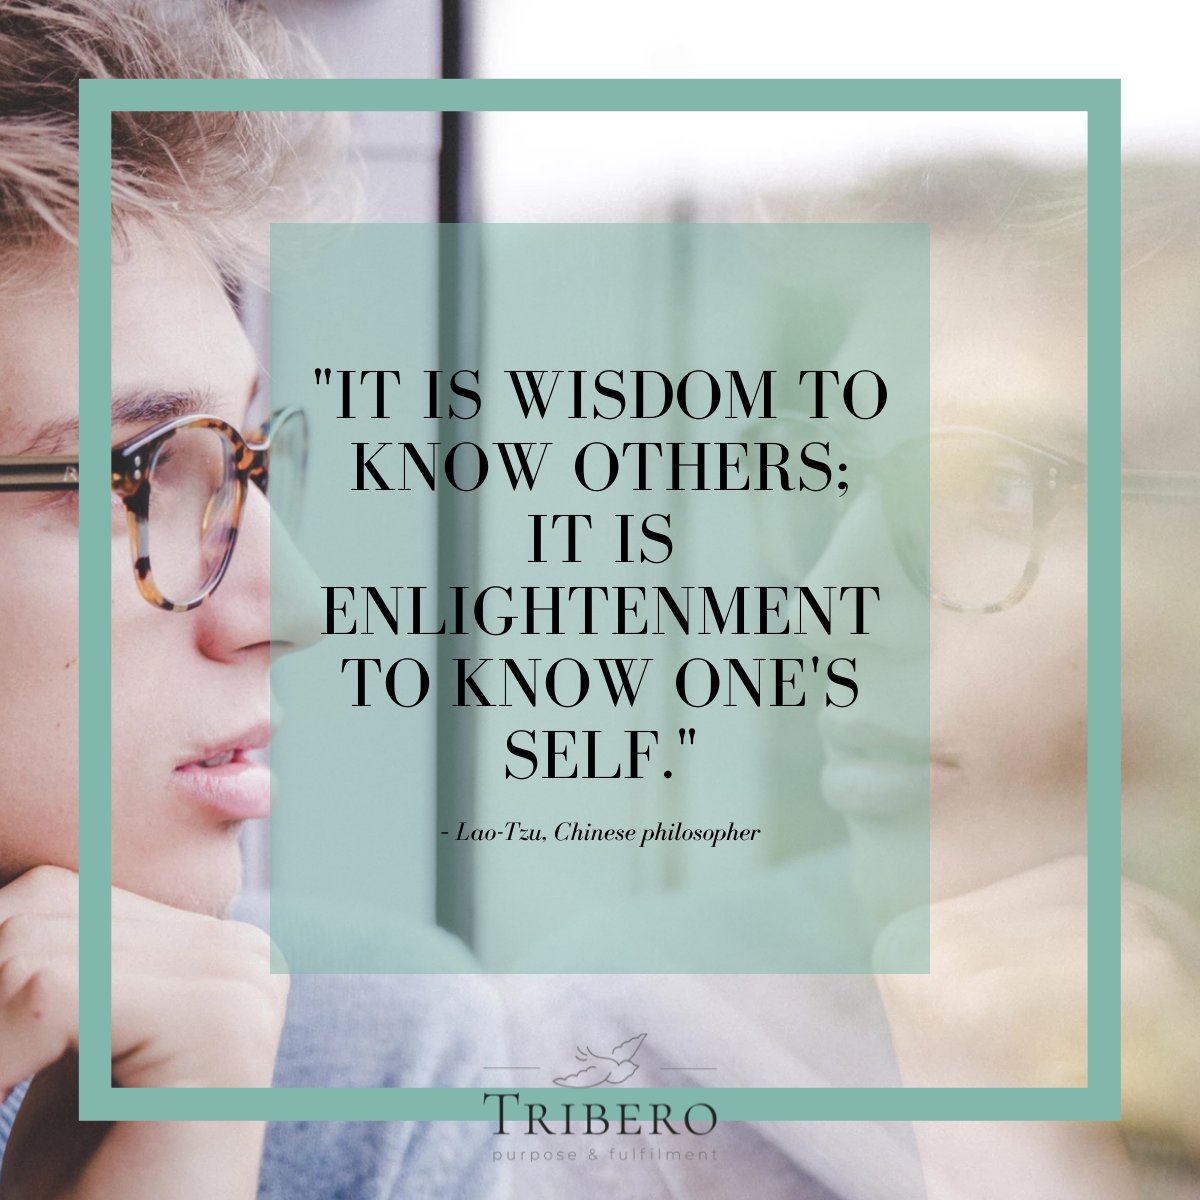 'It is wisdom to know others; it is enlightenment to know one's self.'
– Lao-Tzu, Chinese philosopher
#selfawareness #selfacceptance #growth #personaldevelopment #leadershipdevelopment #development #purposeandfulfilment #tribero